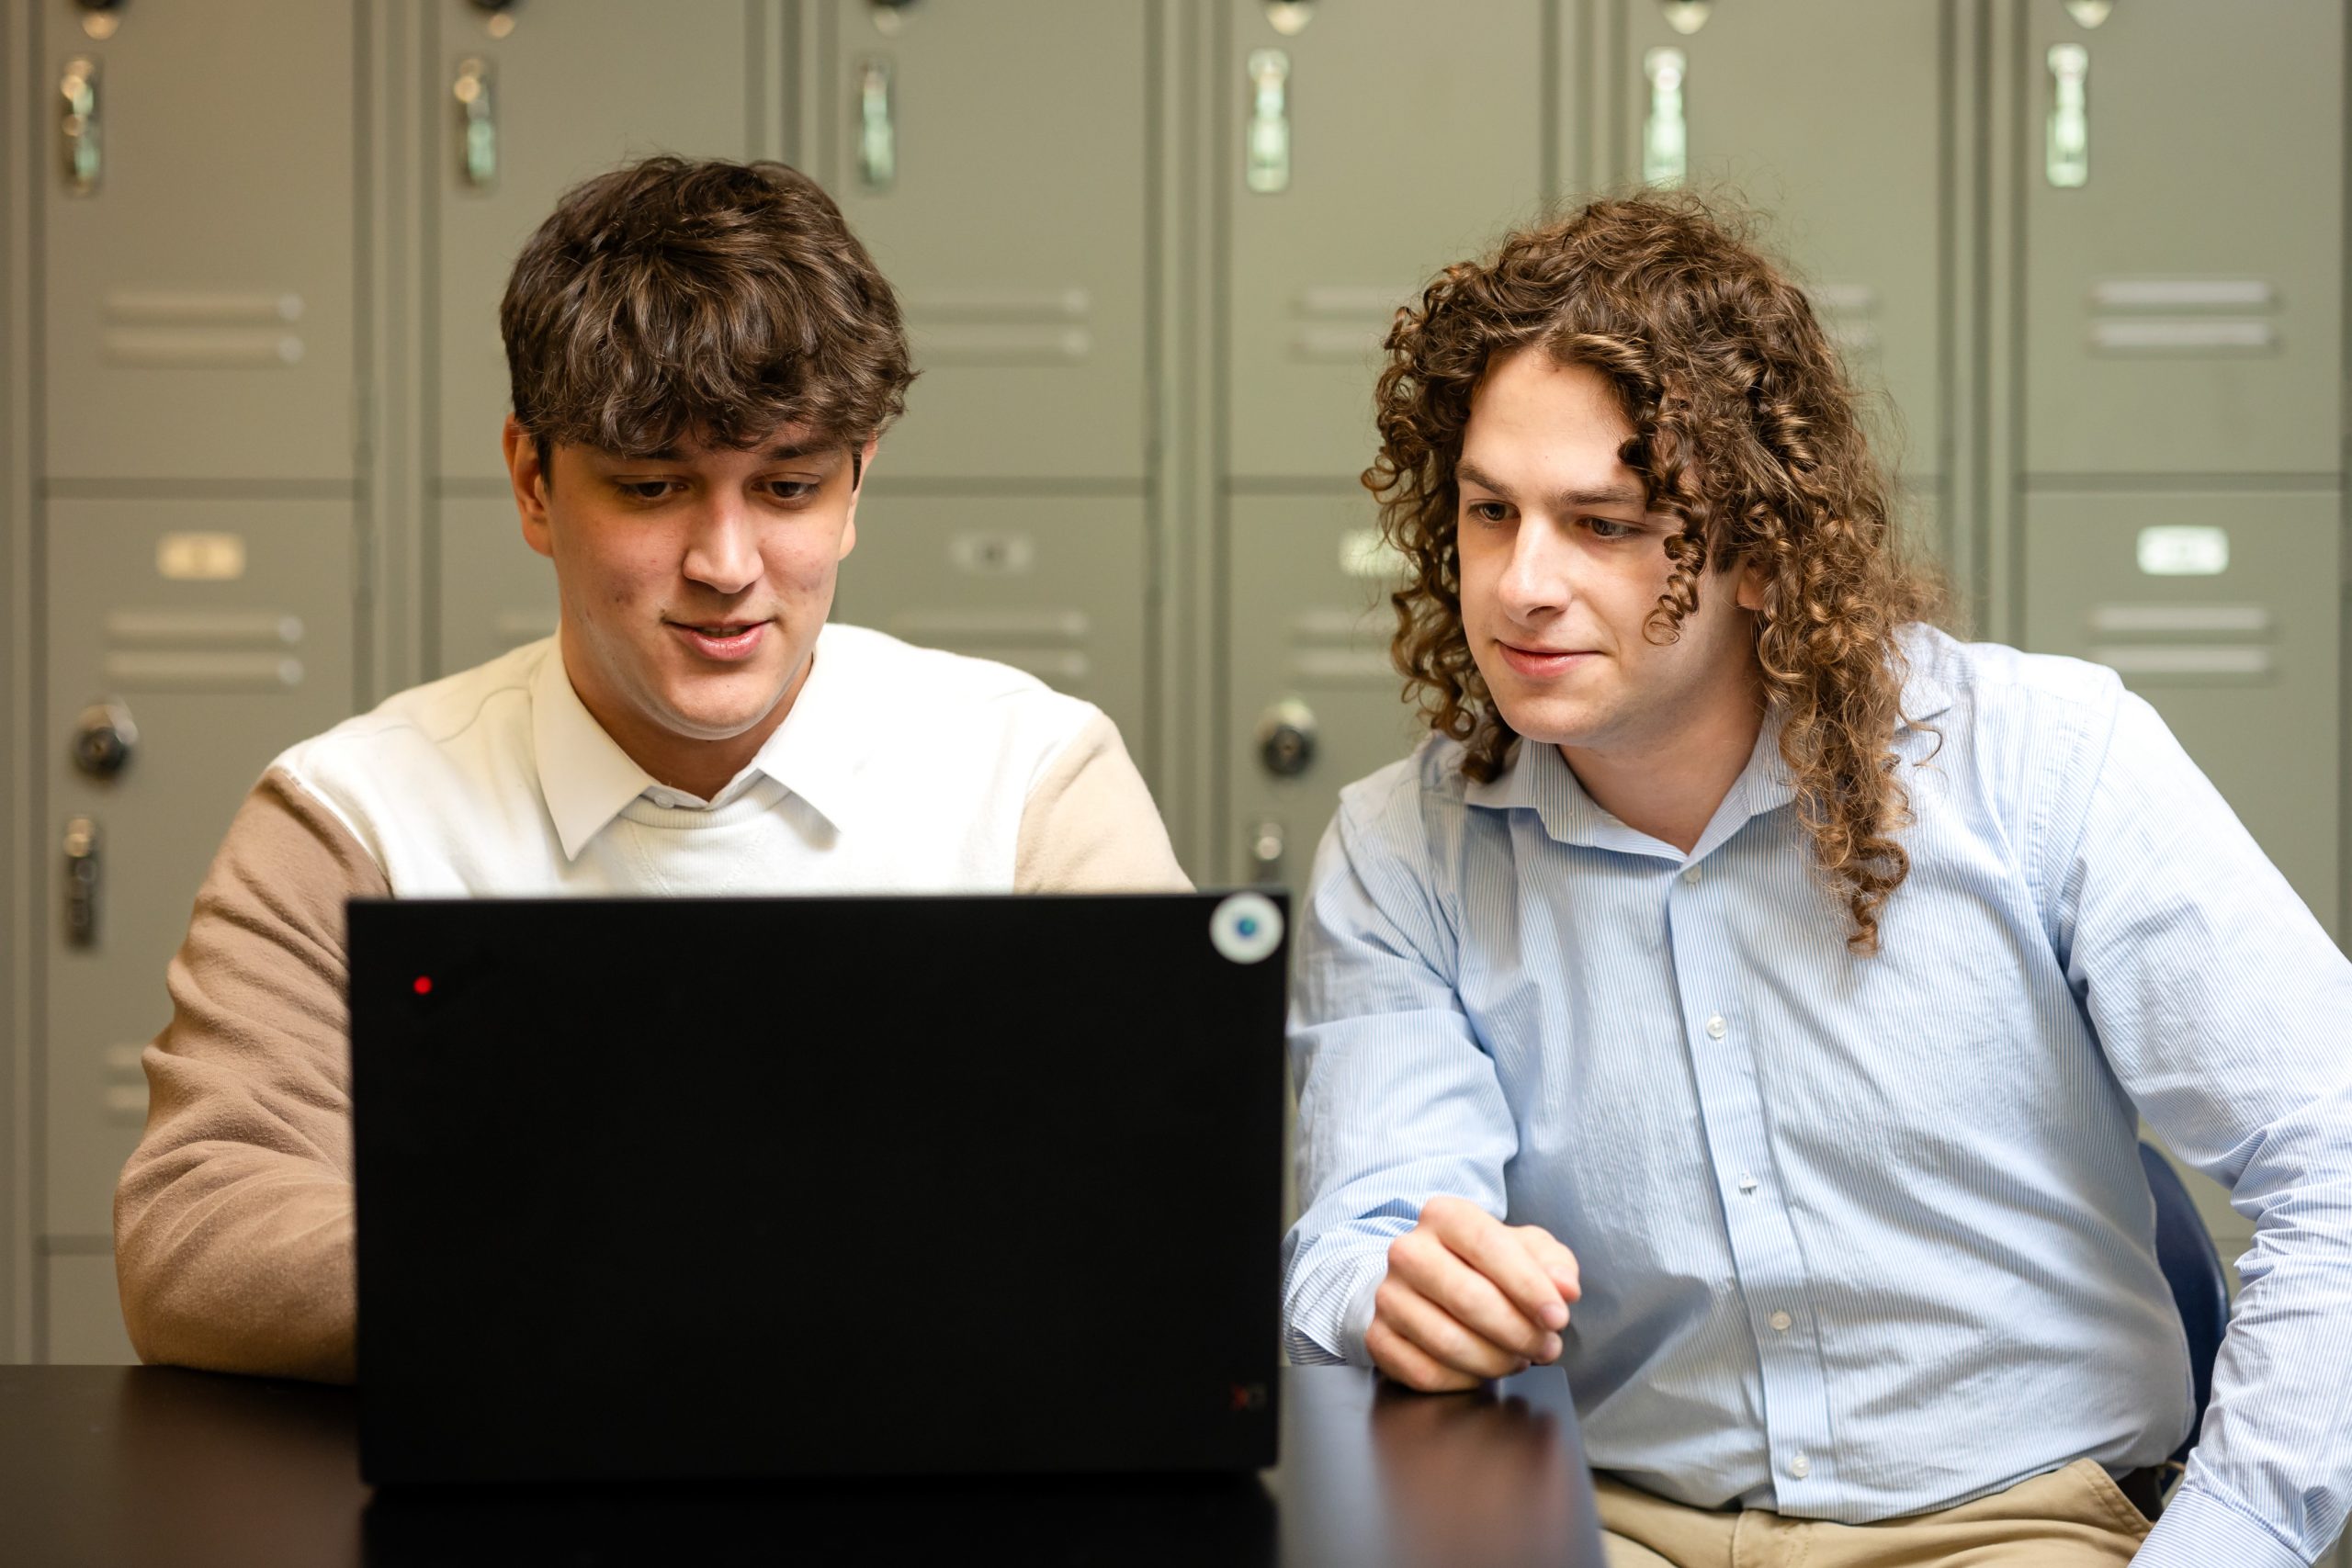 Zavier Miller and Andrew Rutter working on a computer